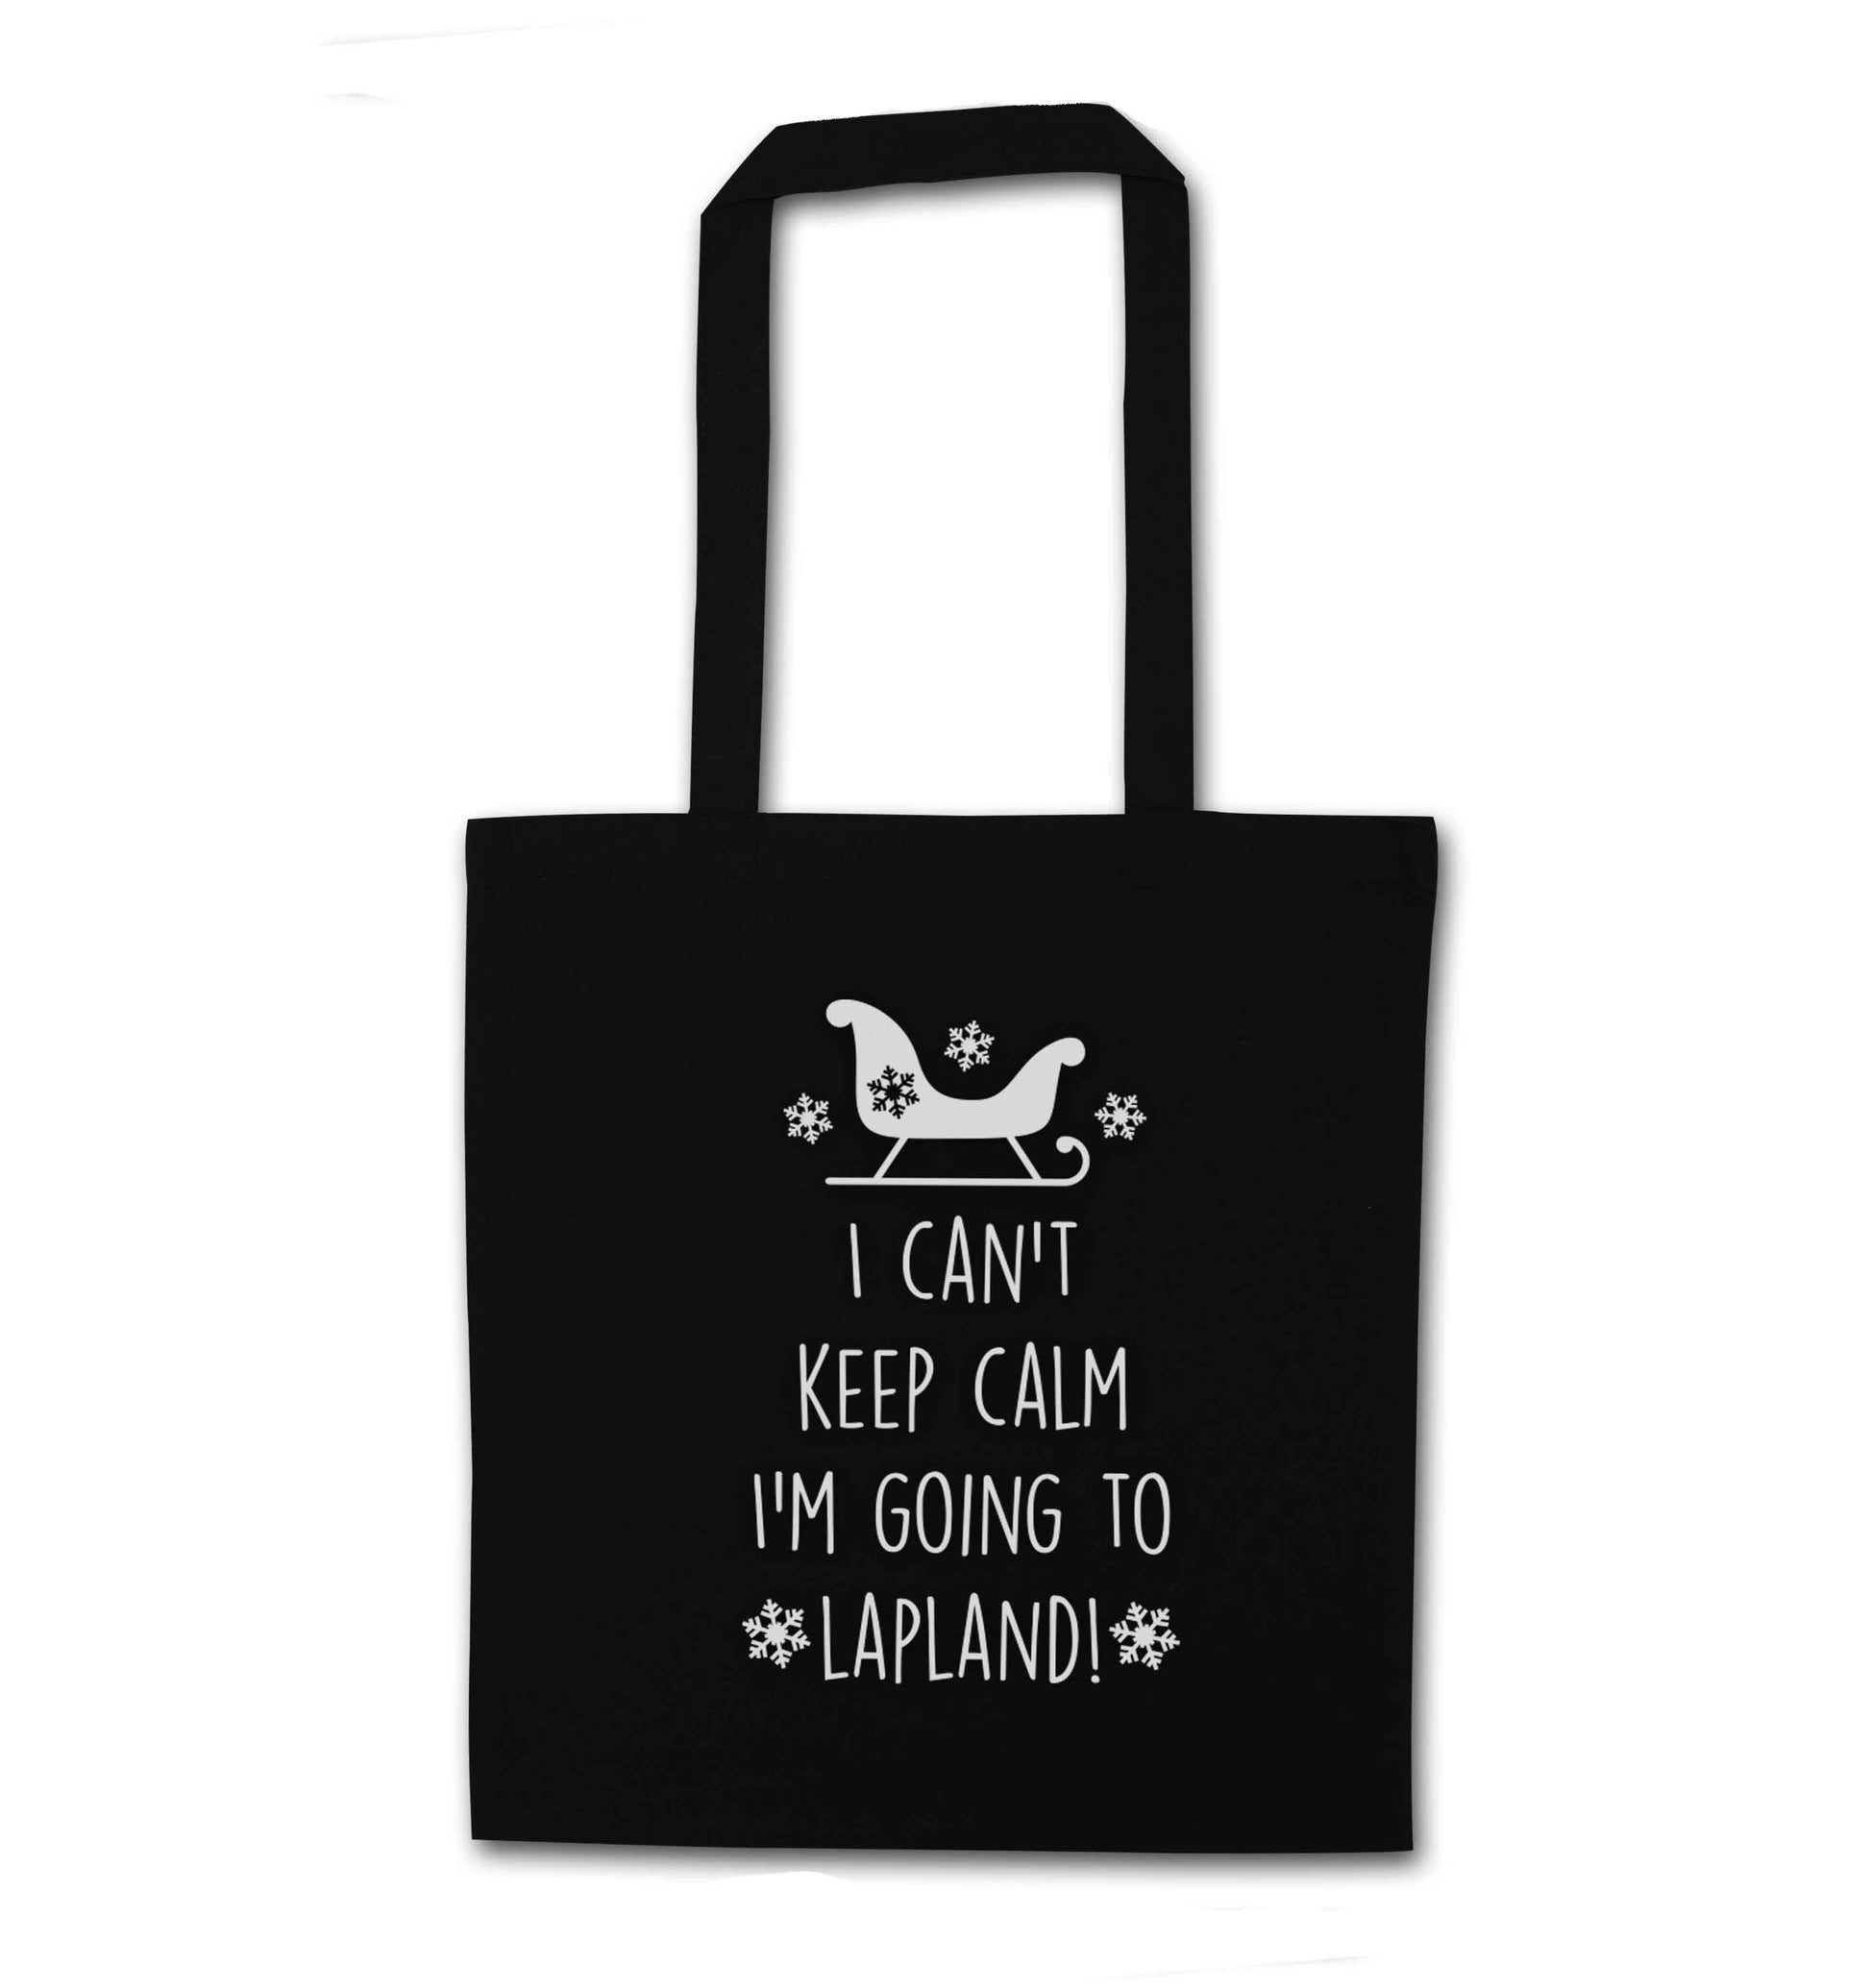 I can't keep calm I'm going to Lapland black tote bag